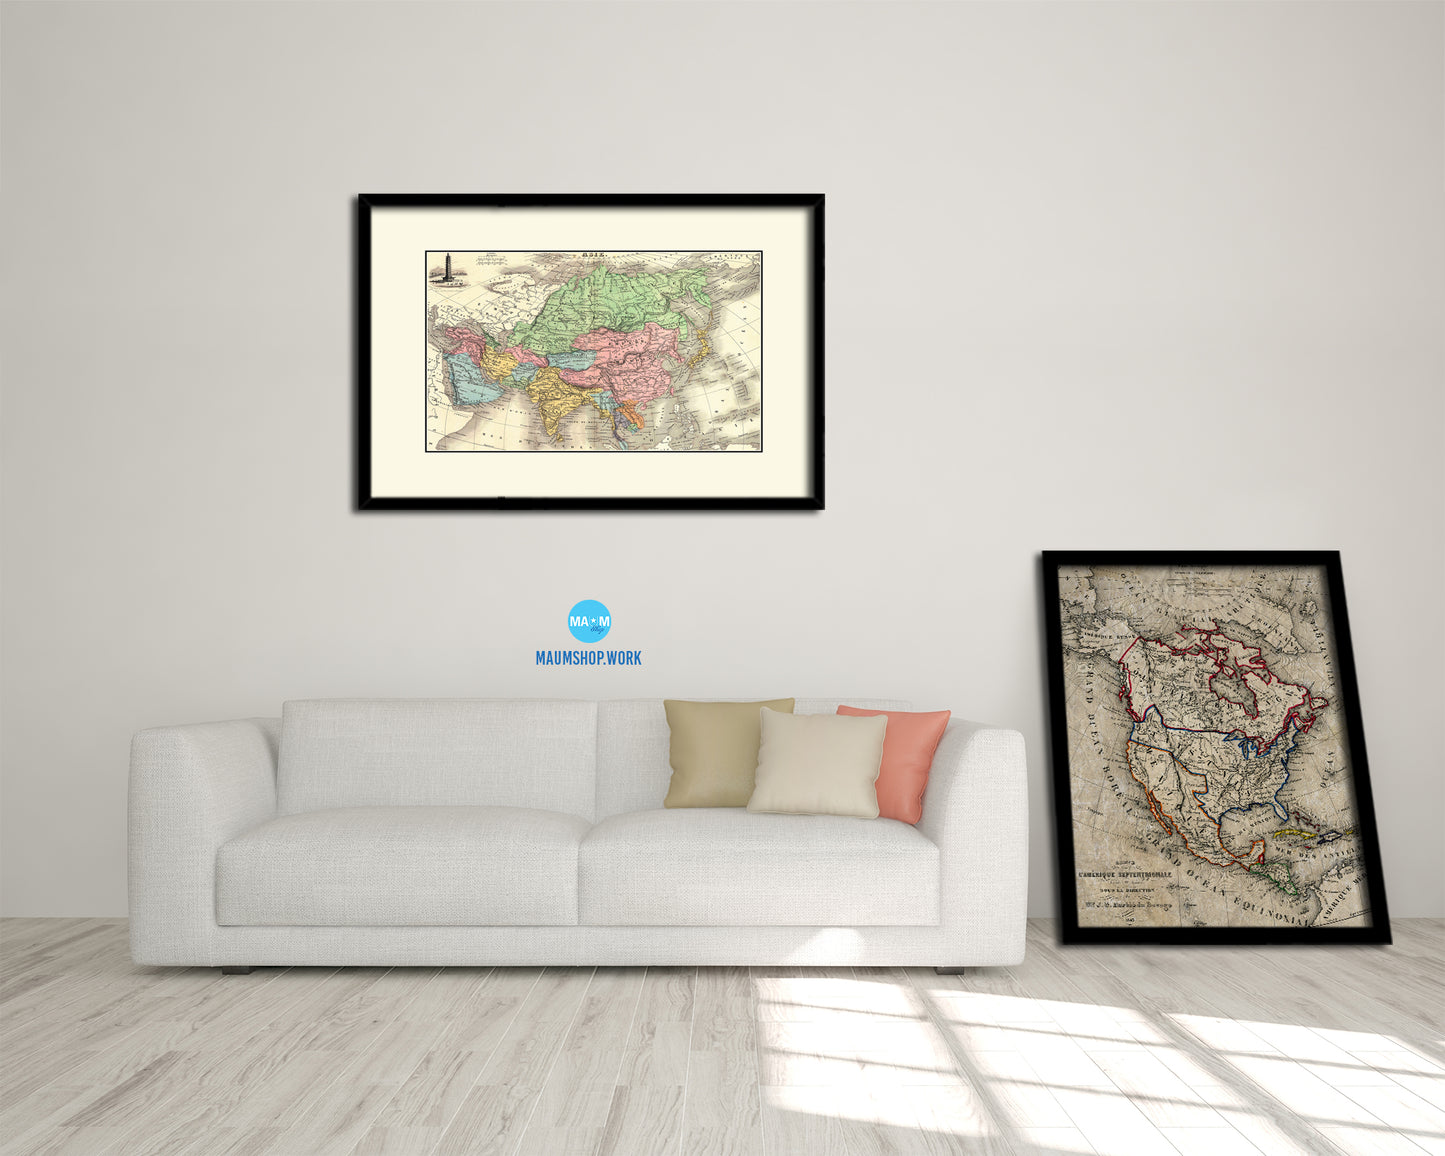 Asia 1875 Old Map Framed Print Art Wall Decor Gifts